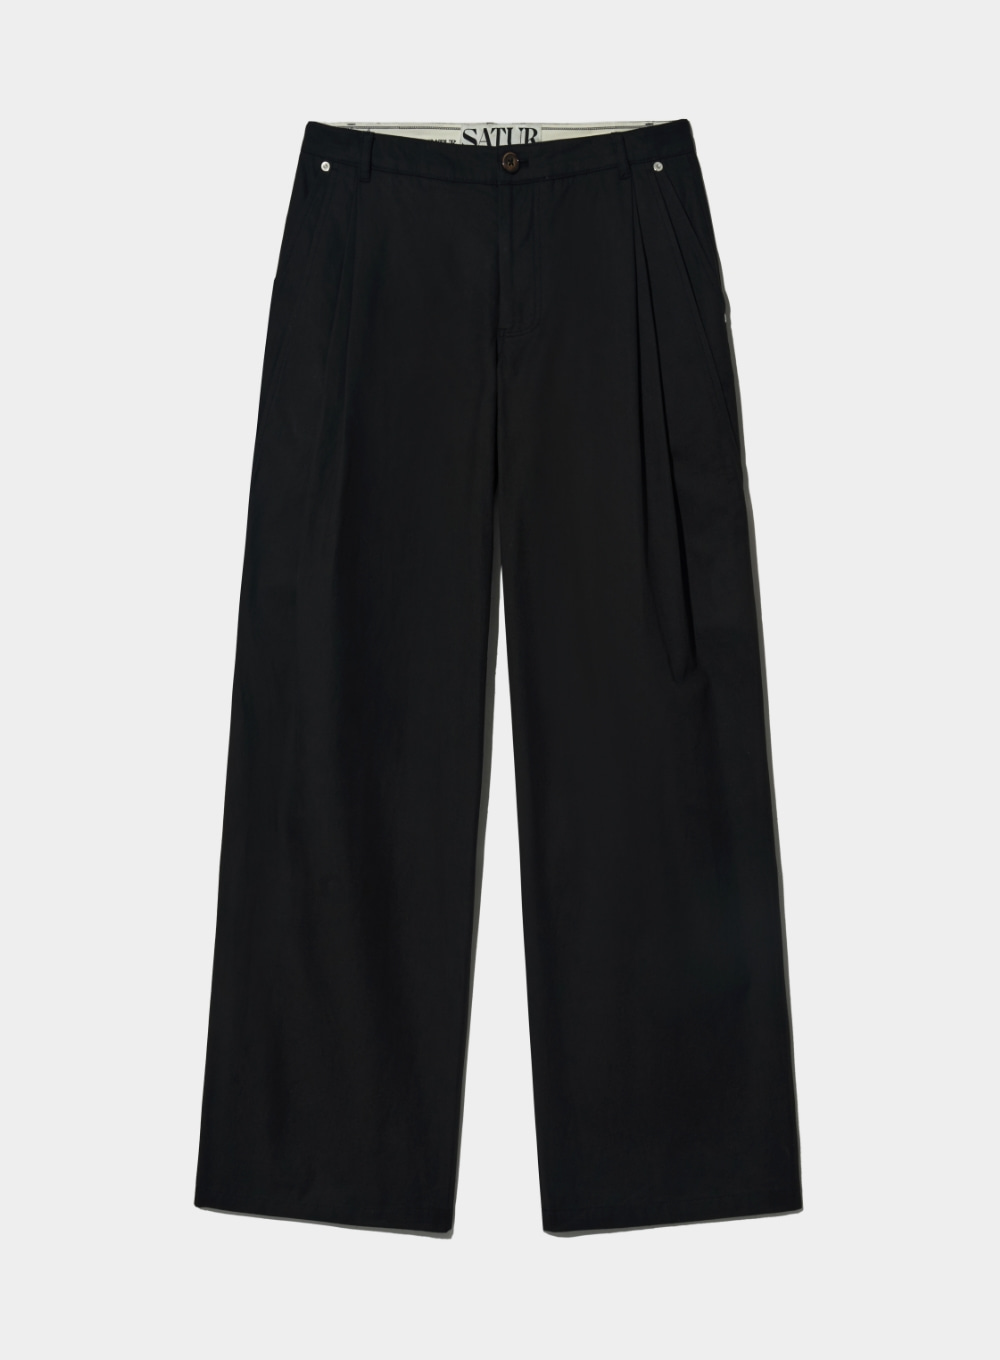 Vinales 2-Tuck Wide Chino Pants - Classic Black